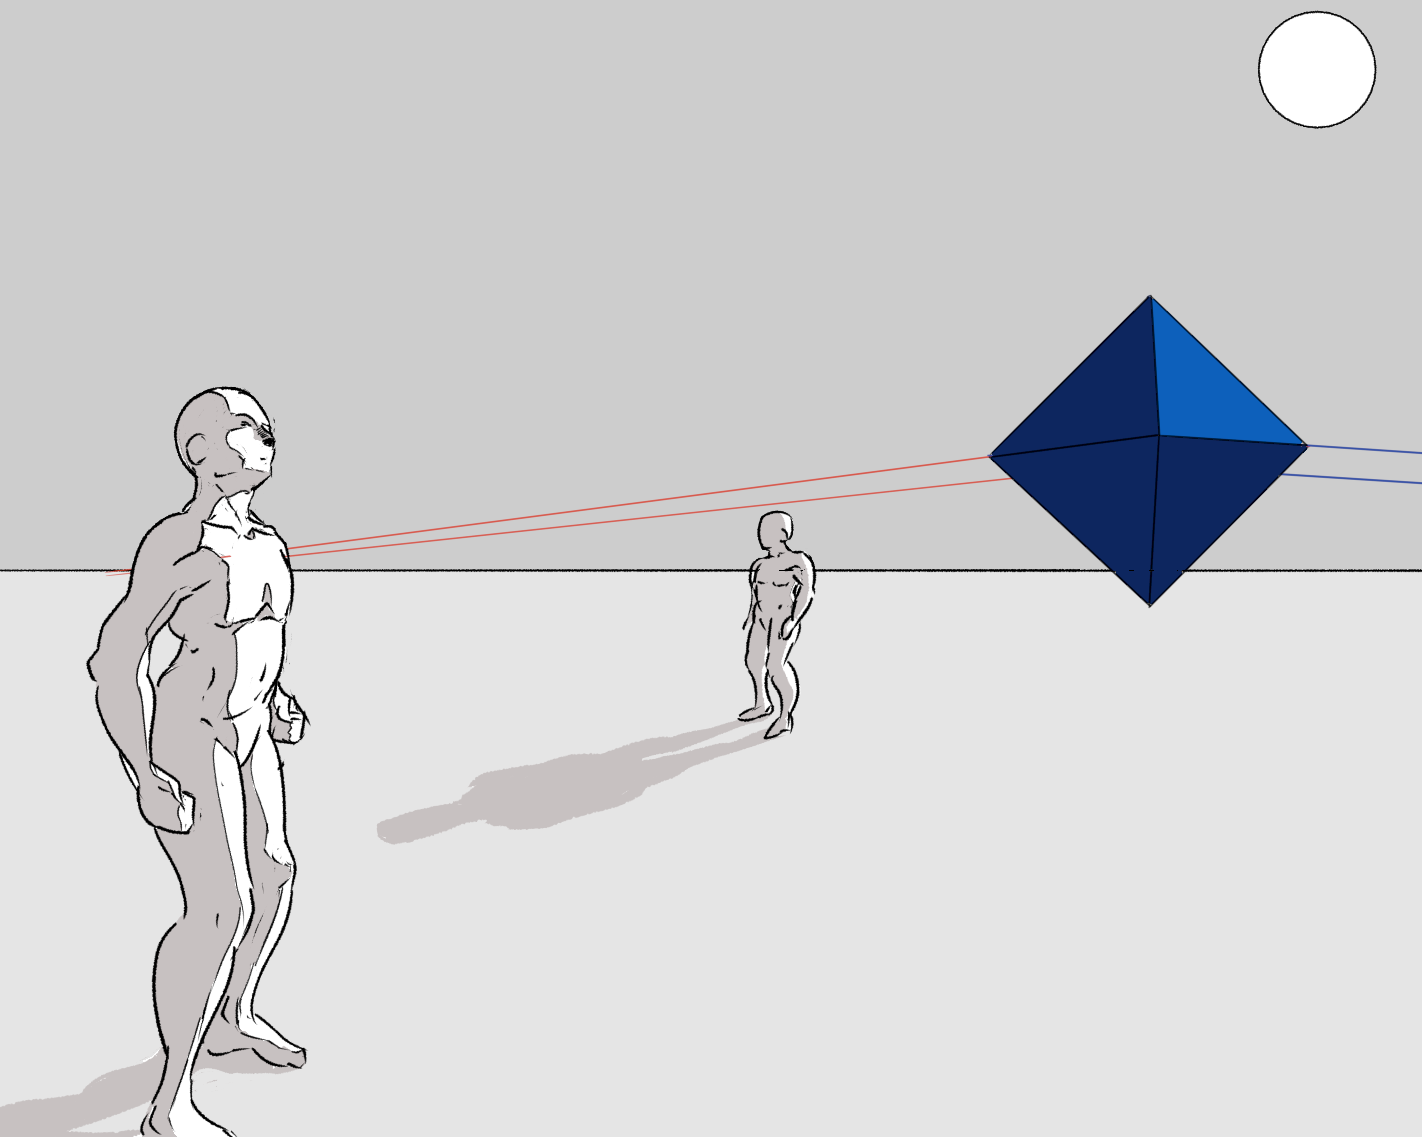 A blue octahedron is placed in the scene with the two figures. It doesn't yet have a shadow but it is above the ground.